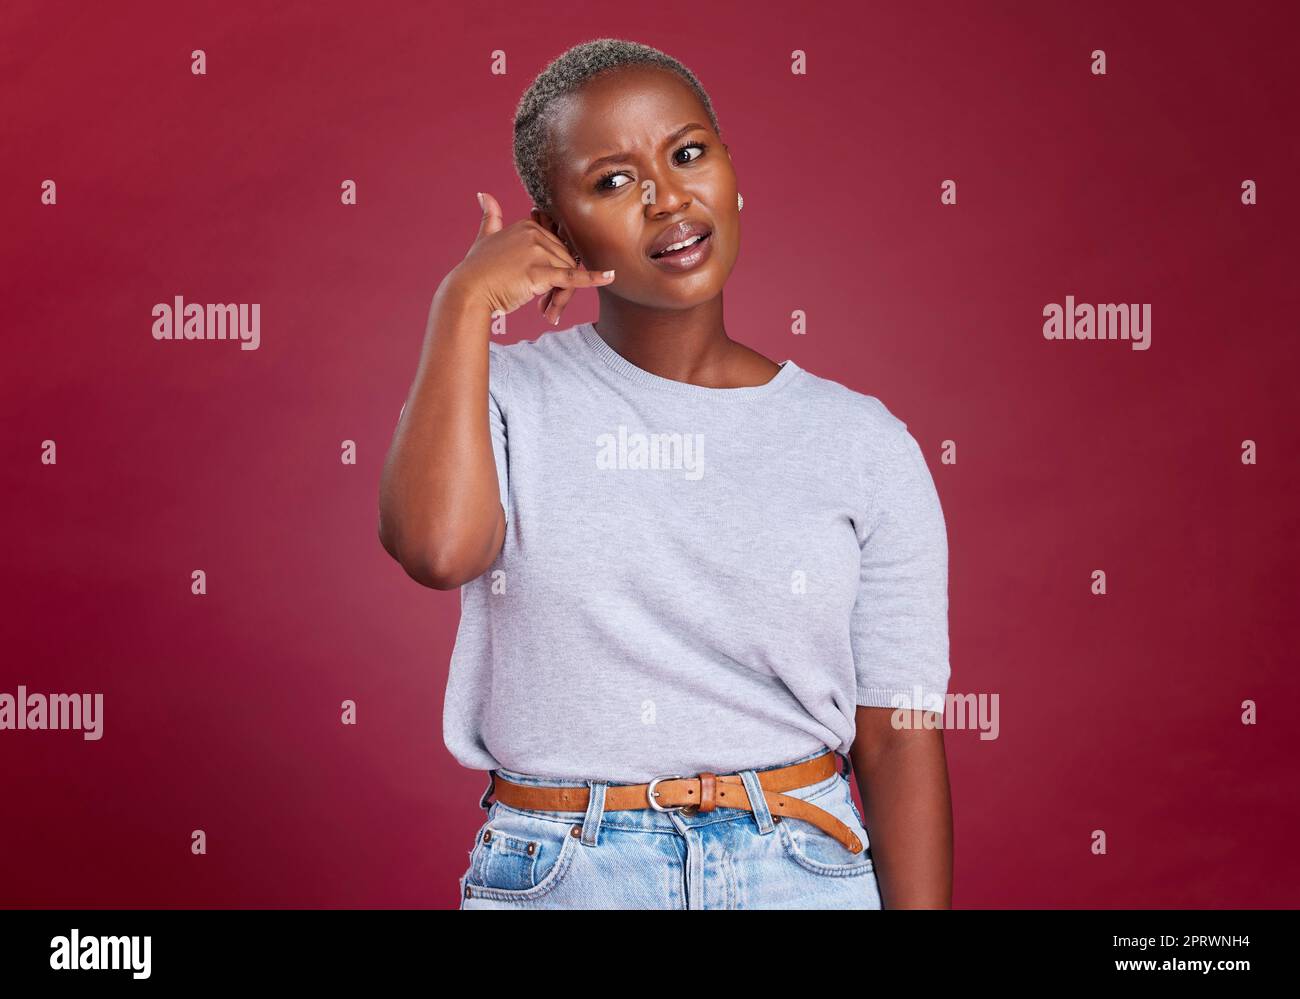 Black woman, annoyed and hand phone call sign by studio background for question, communication or network. Model, woman and call me symbol with frown Stock Photo